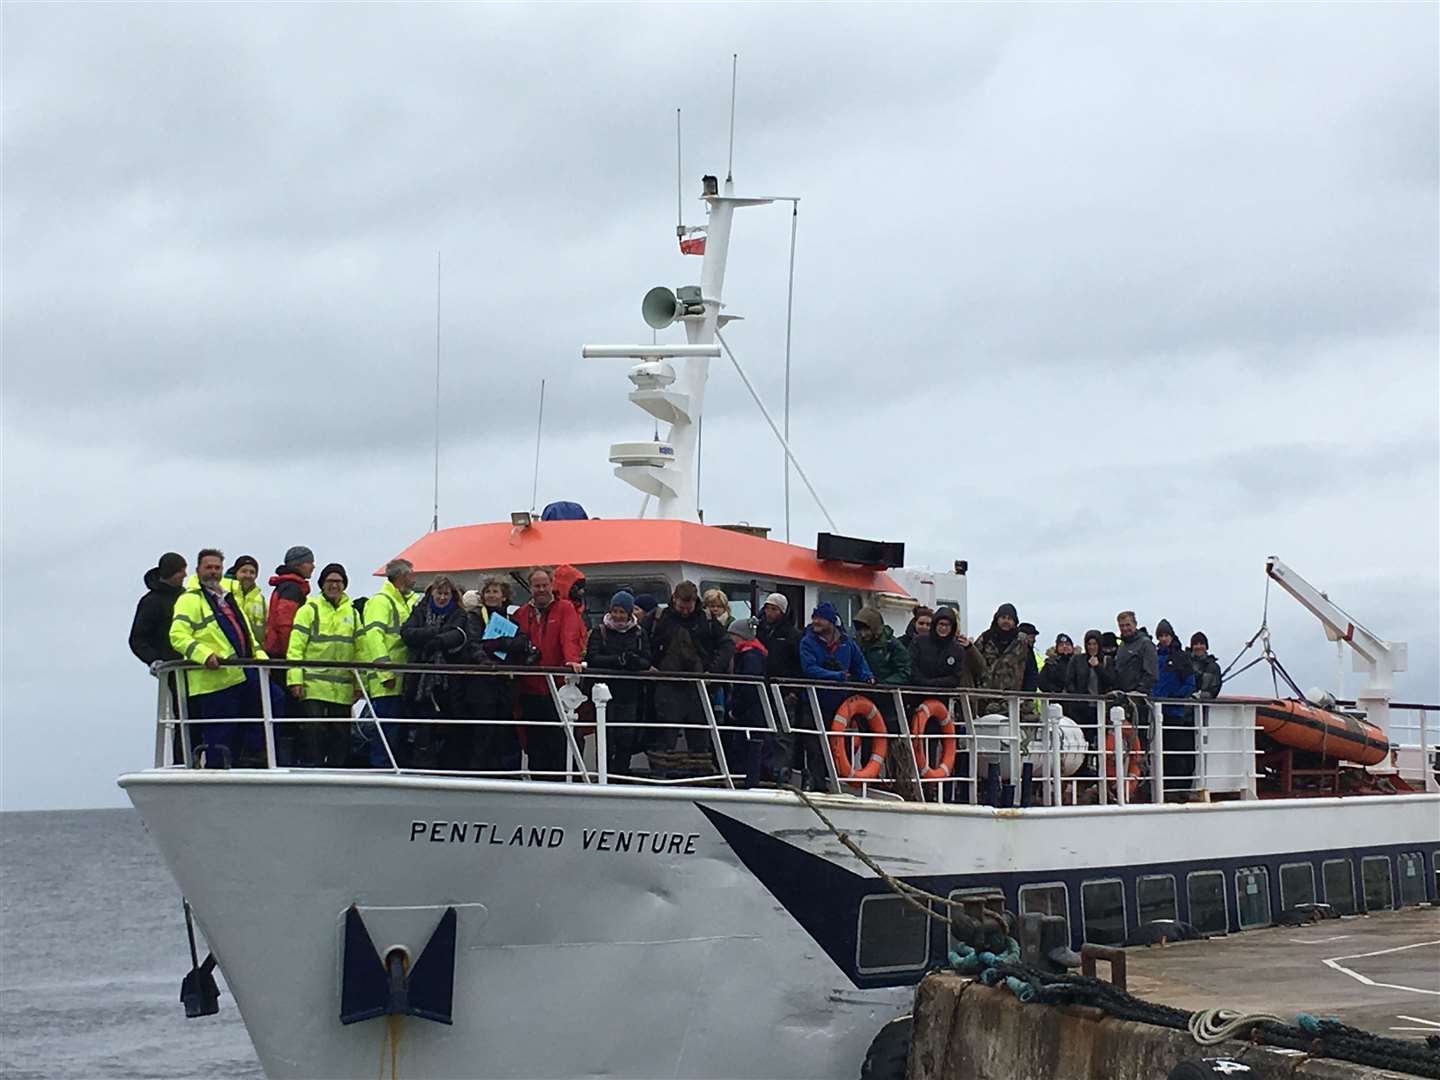 Orca watchers and the crew of the Pentland Venture at John O’Groats harbour on Sunday. Picture: Fred Fermor